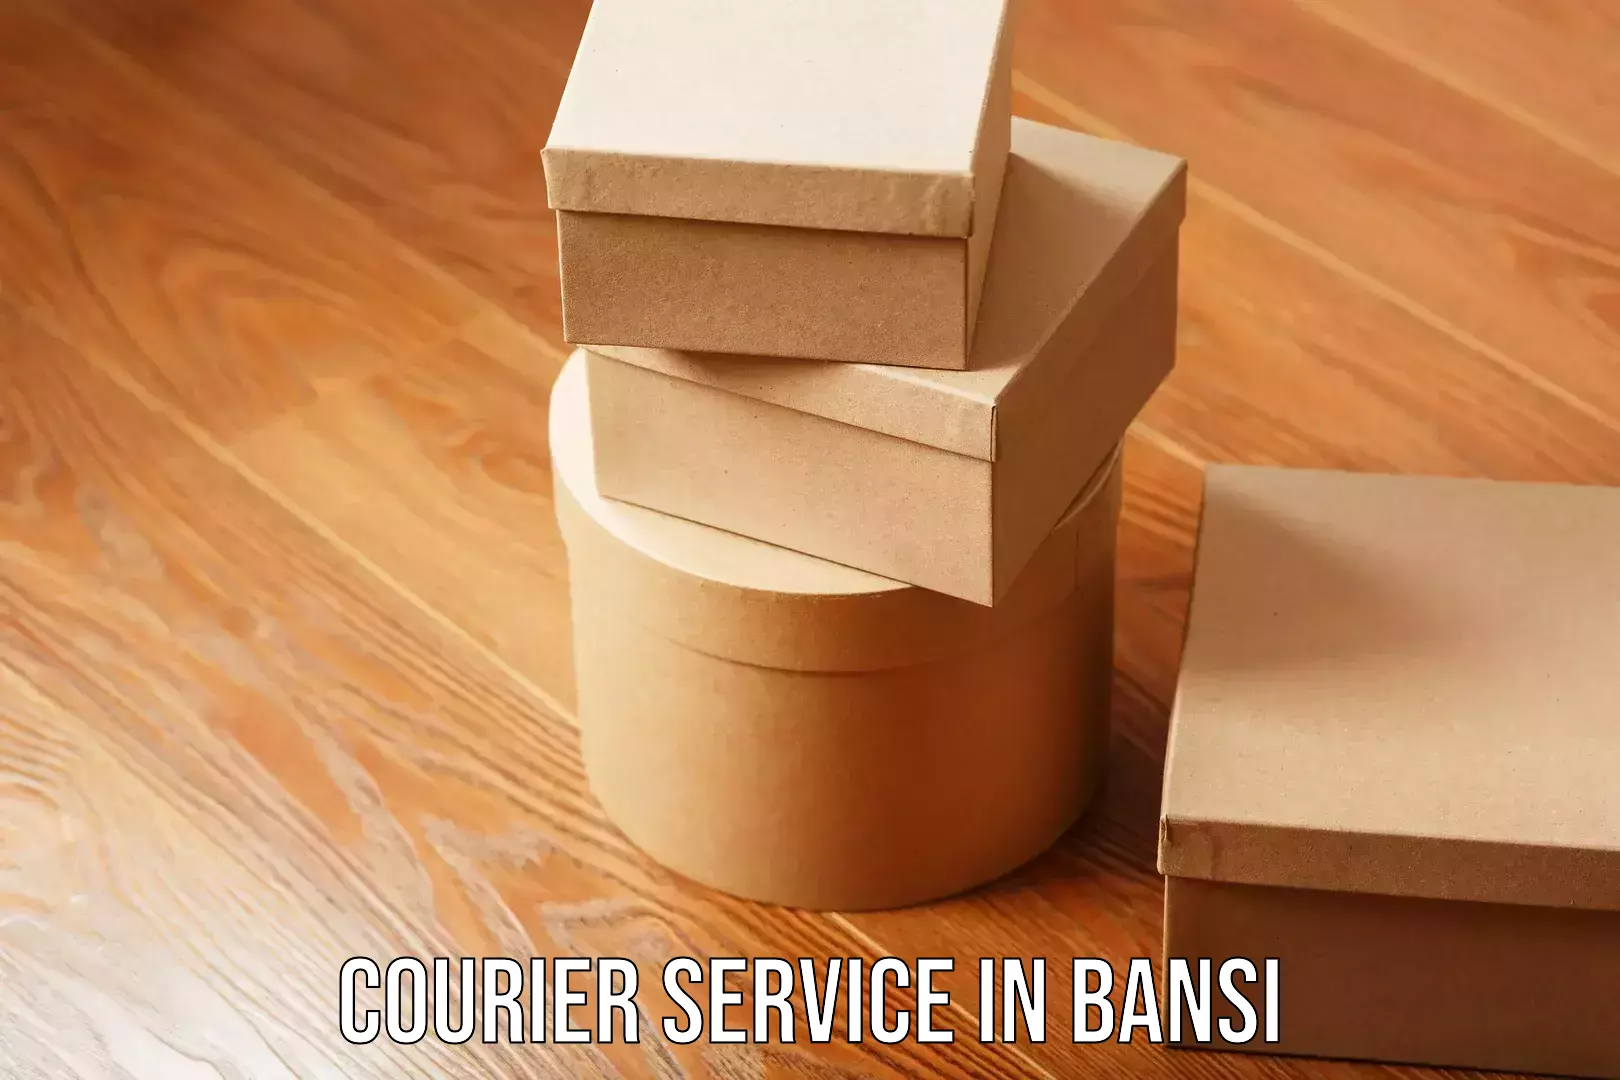 Advanced package delivery in Bansi